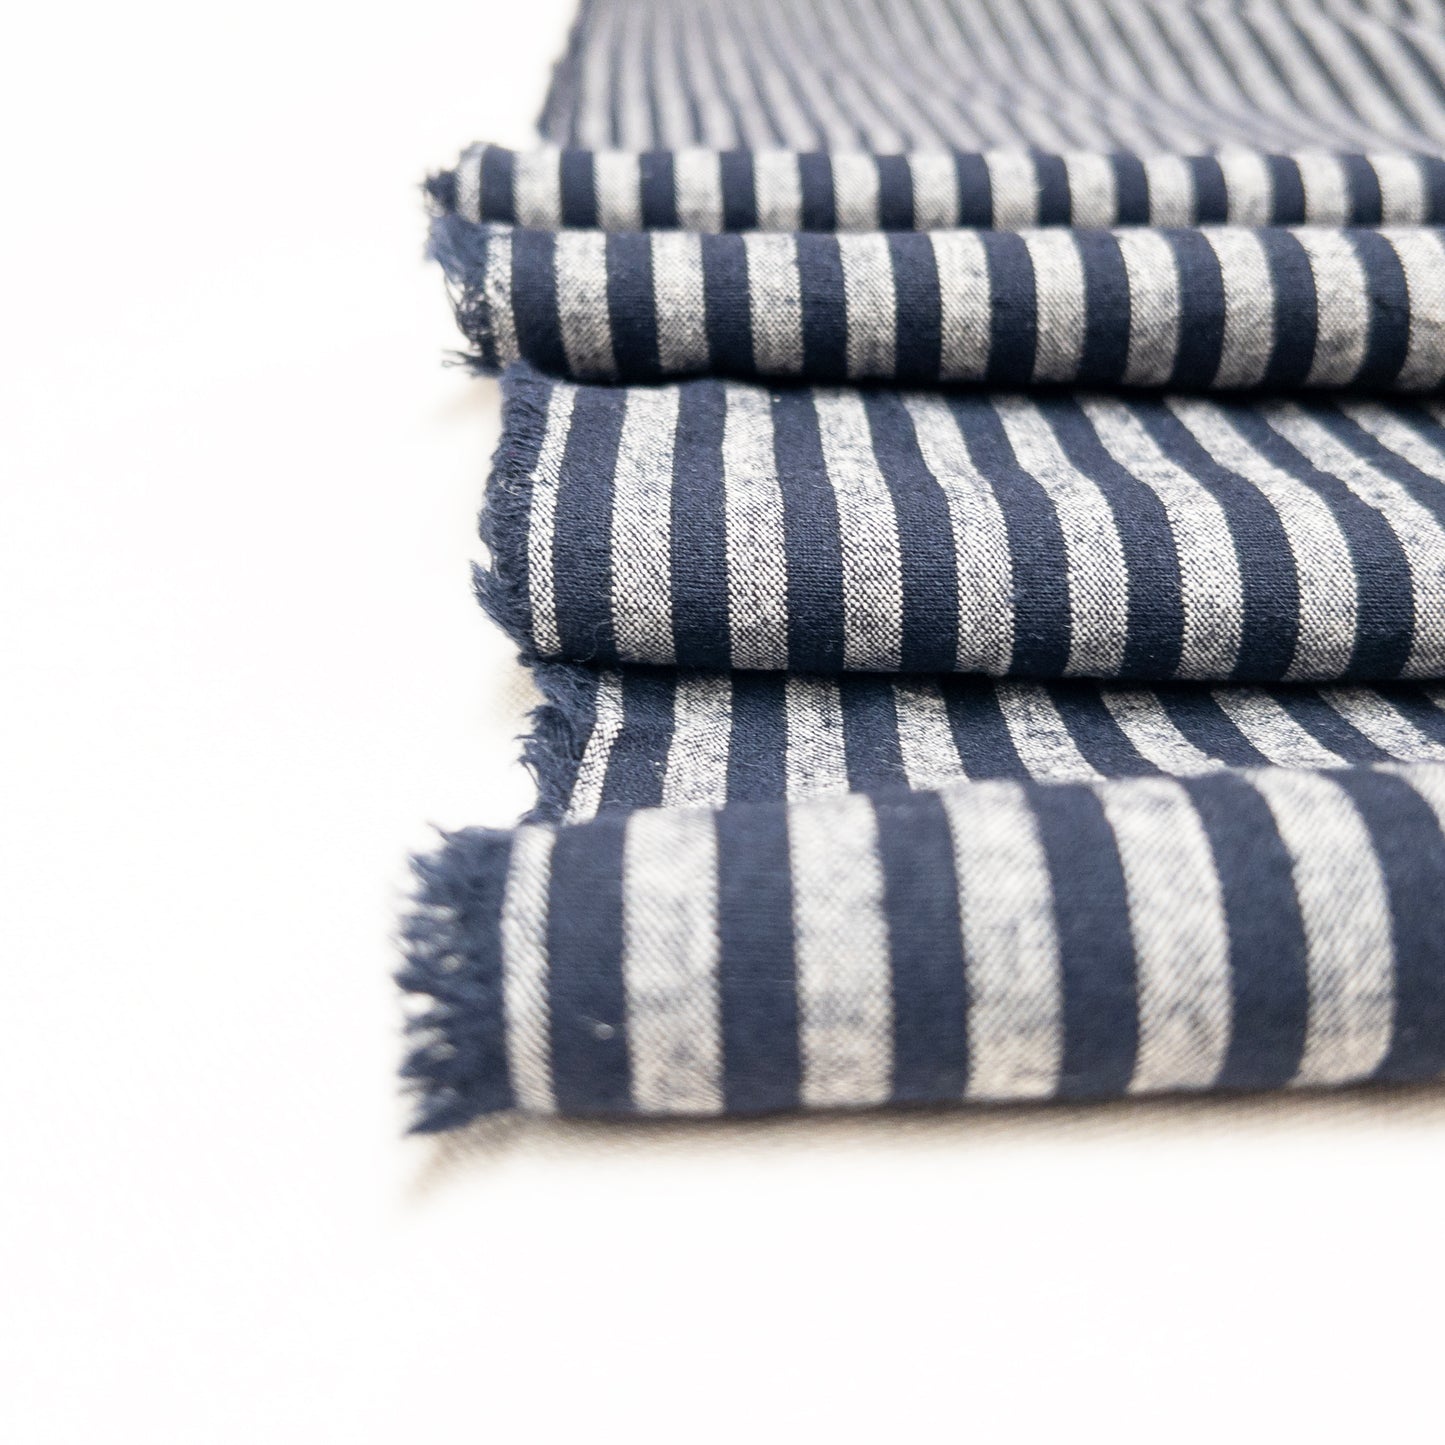 Linen Cotton Stripes in Black and Silver